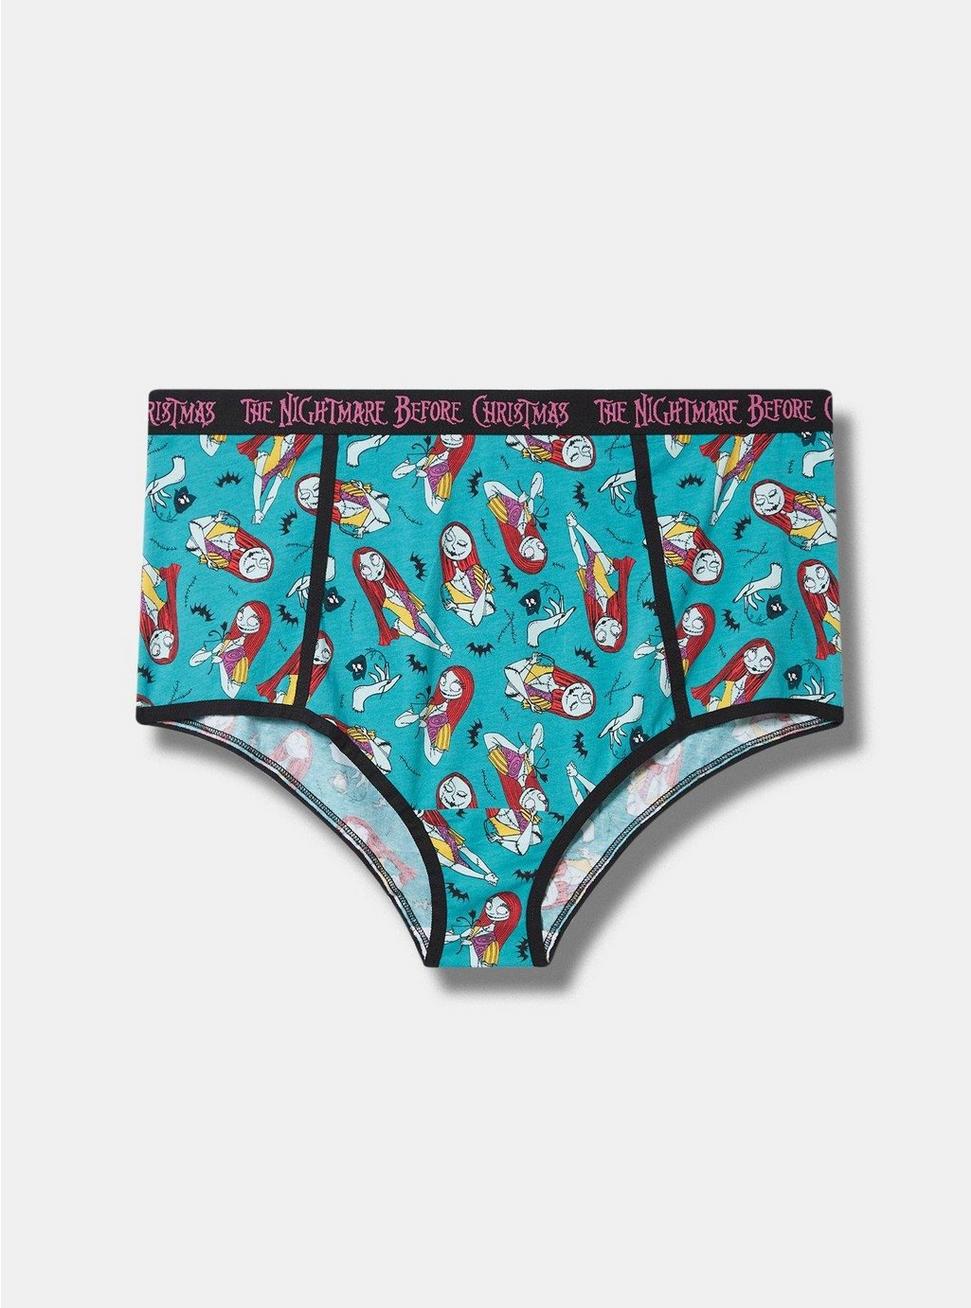 Plus Size Disney The Nightmare Before Christmas Cheeky Mid Rise Cotton Panty, MULTI, hi-res